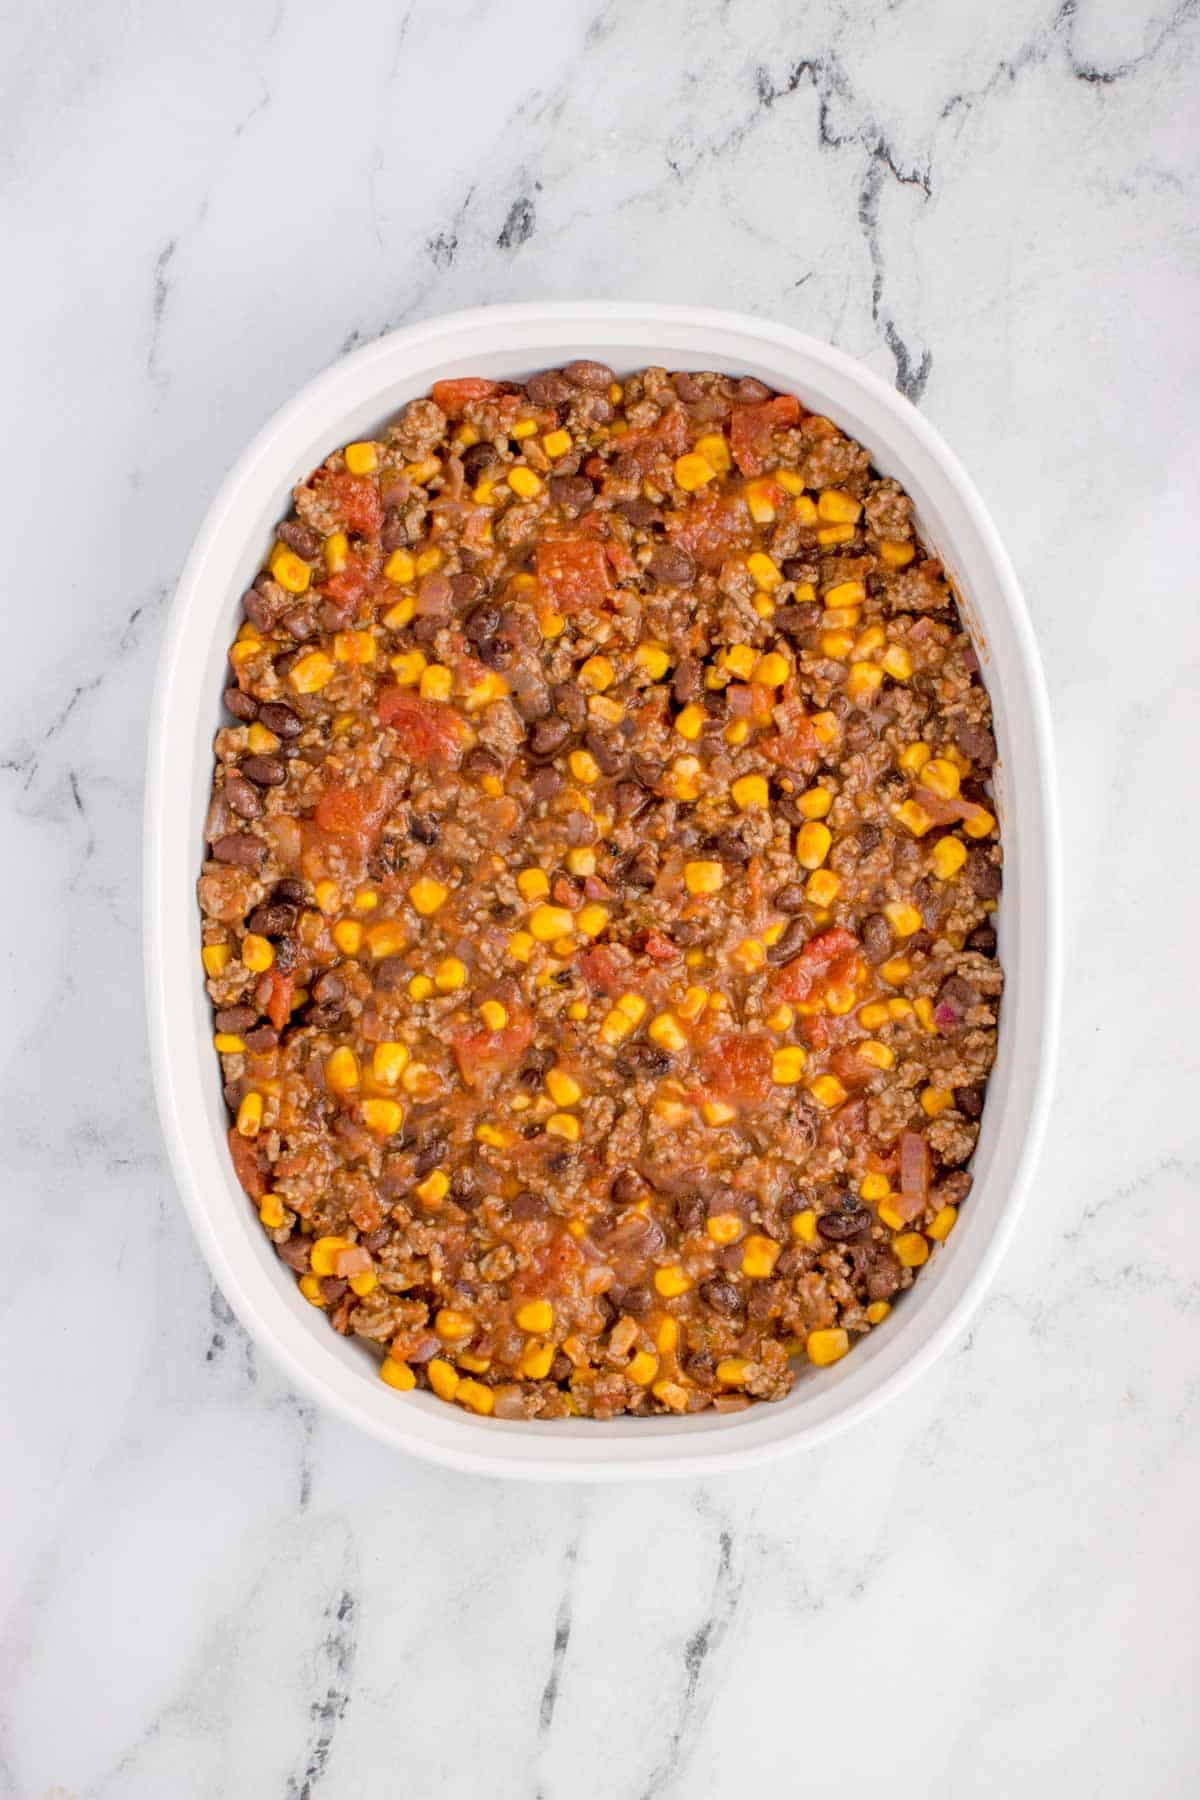 ground beef mixture spread in a baking dish